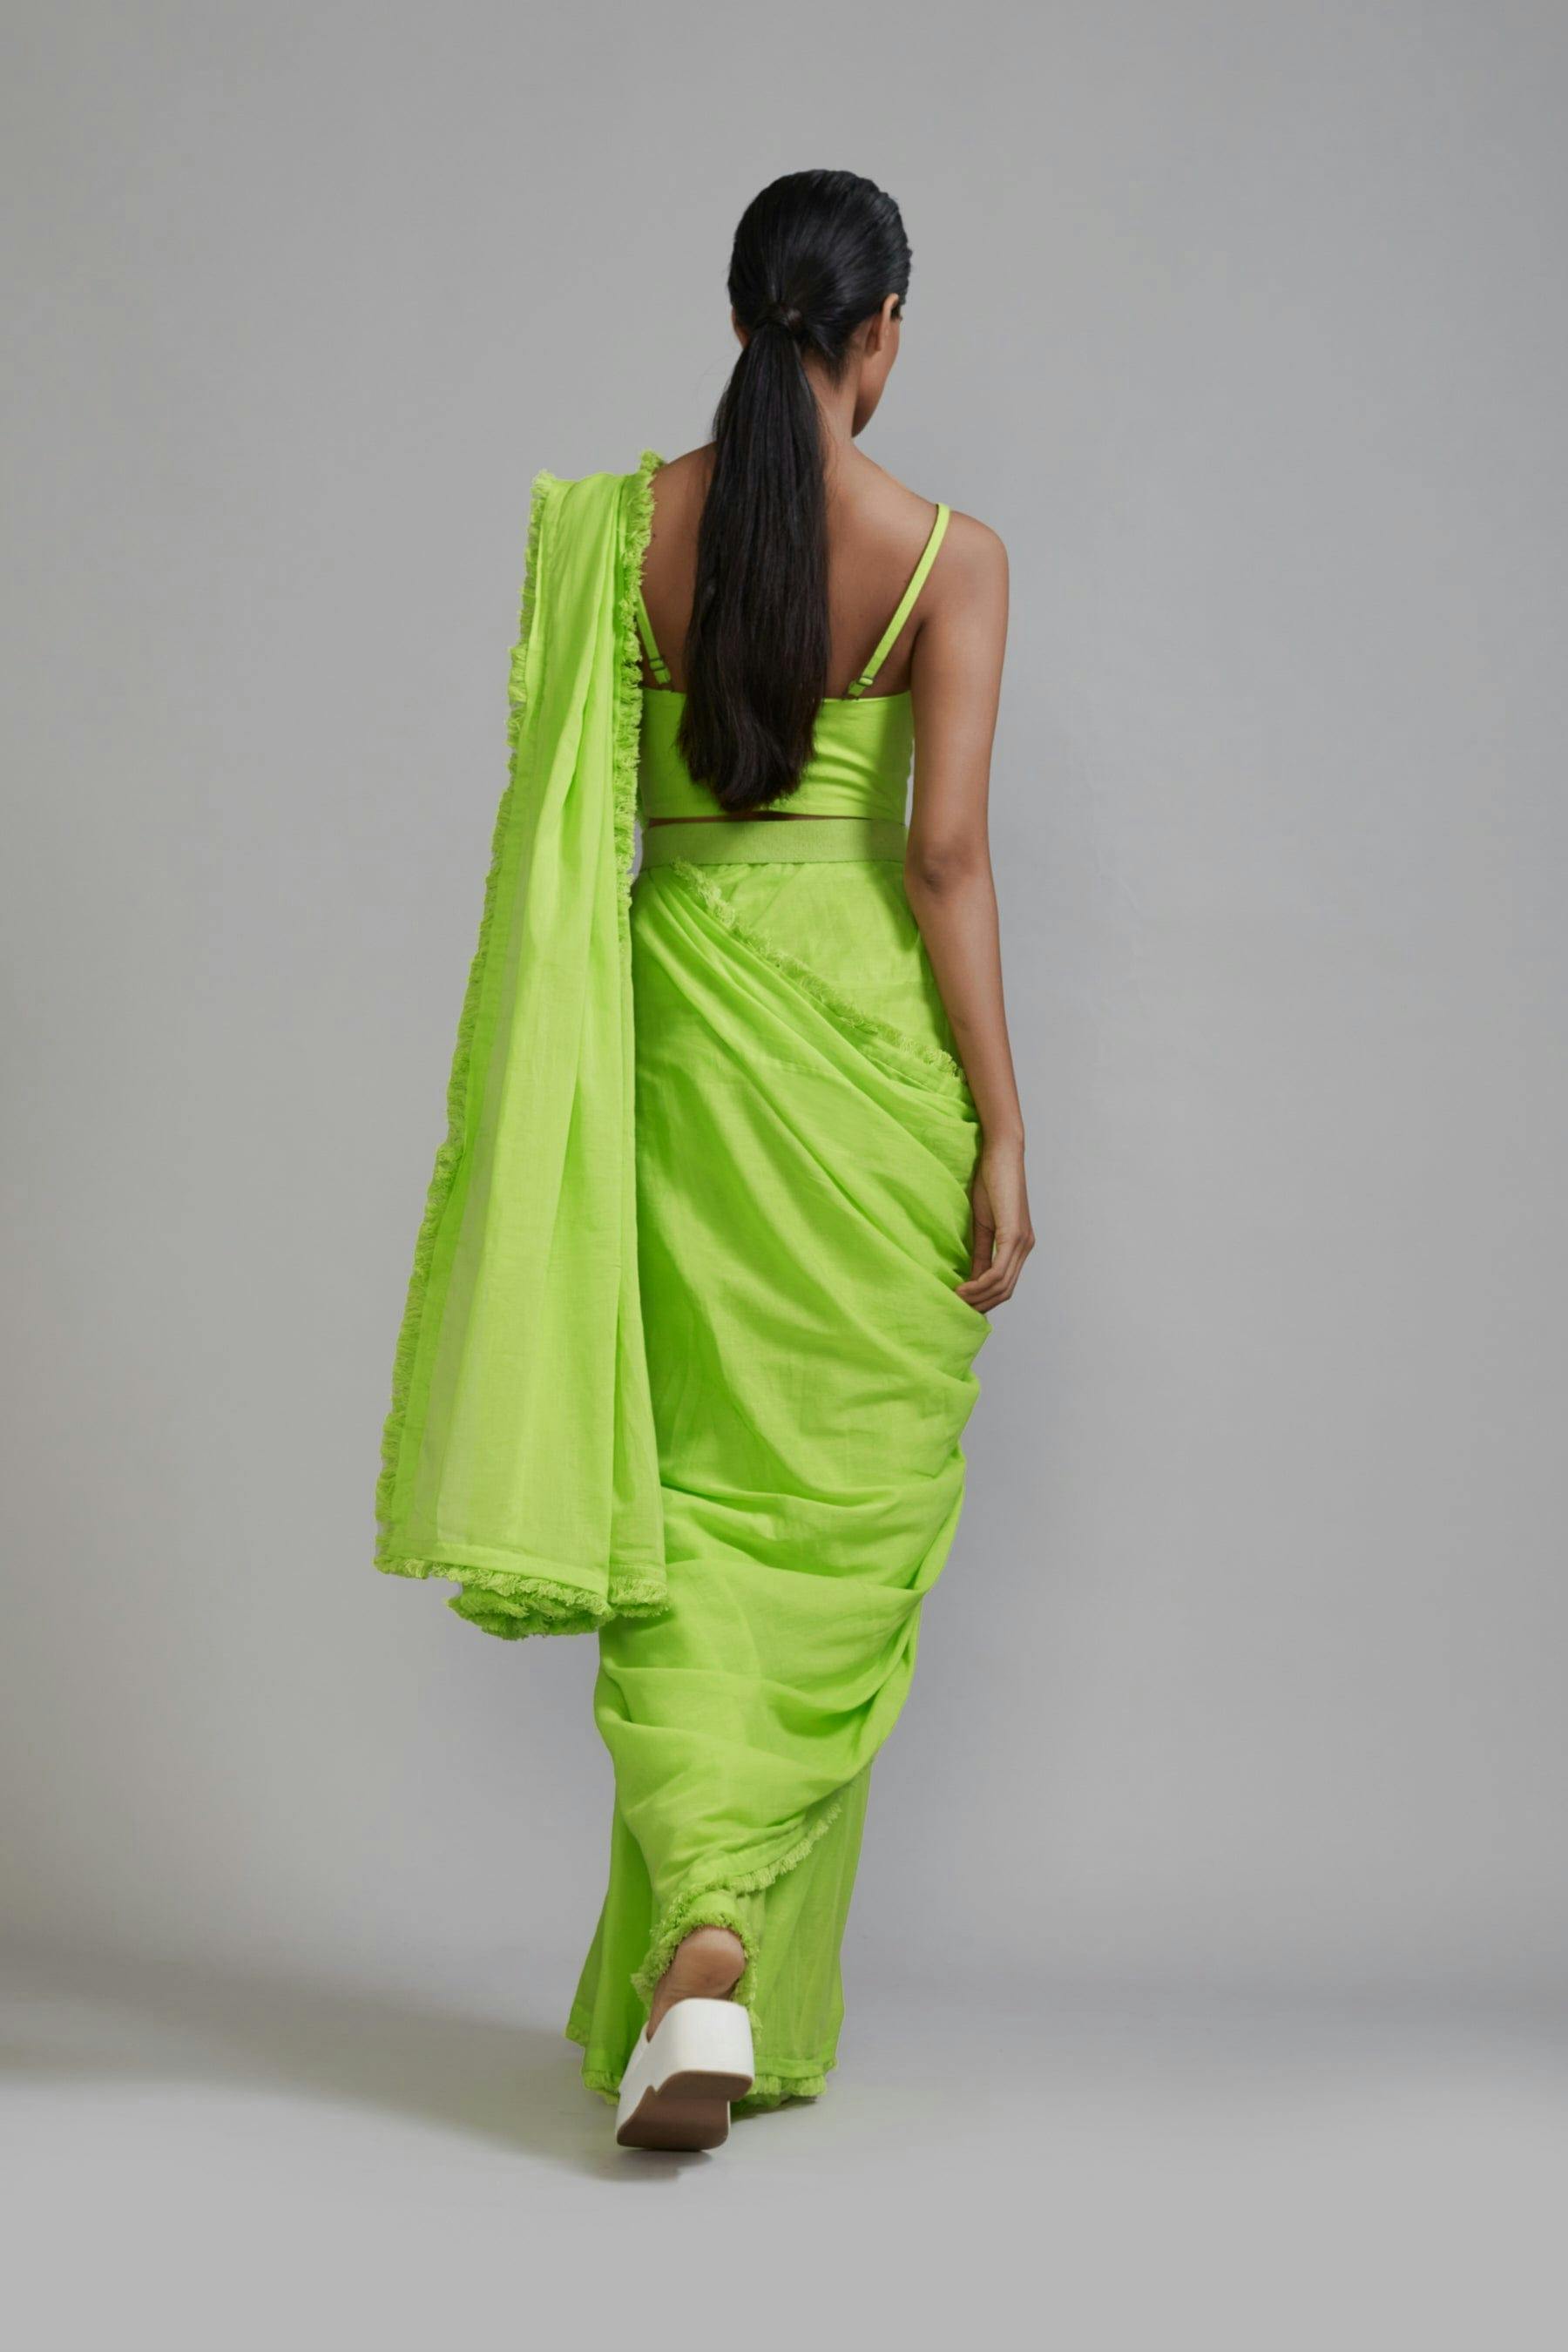 Thumbnail preview #2 for Neon Green Fringed Saree